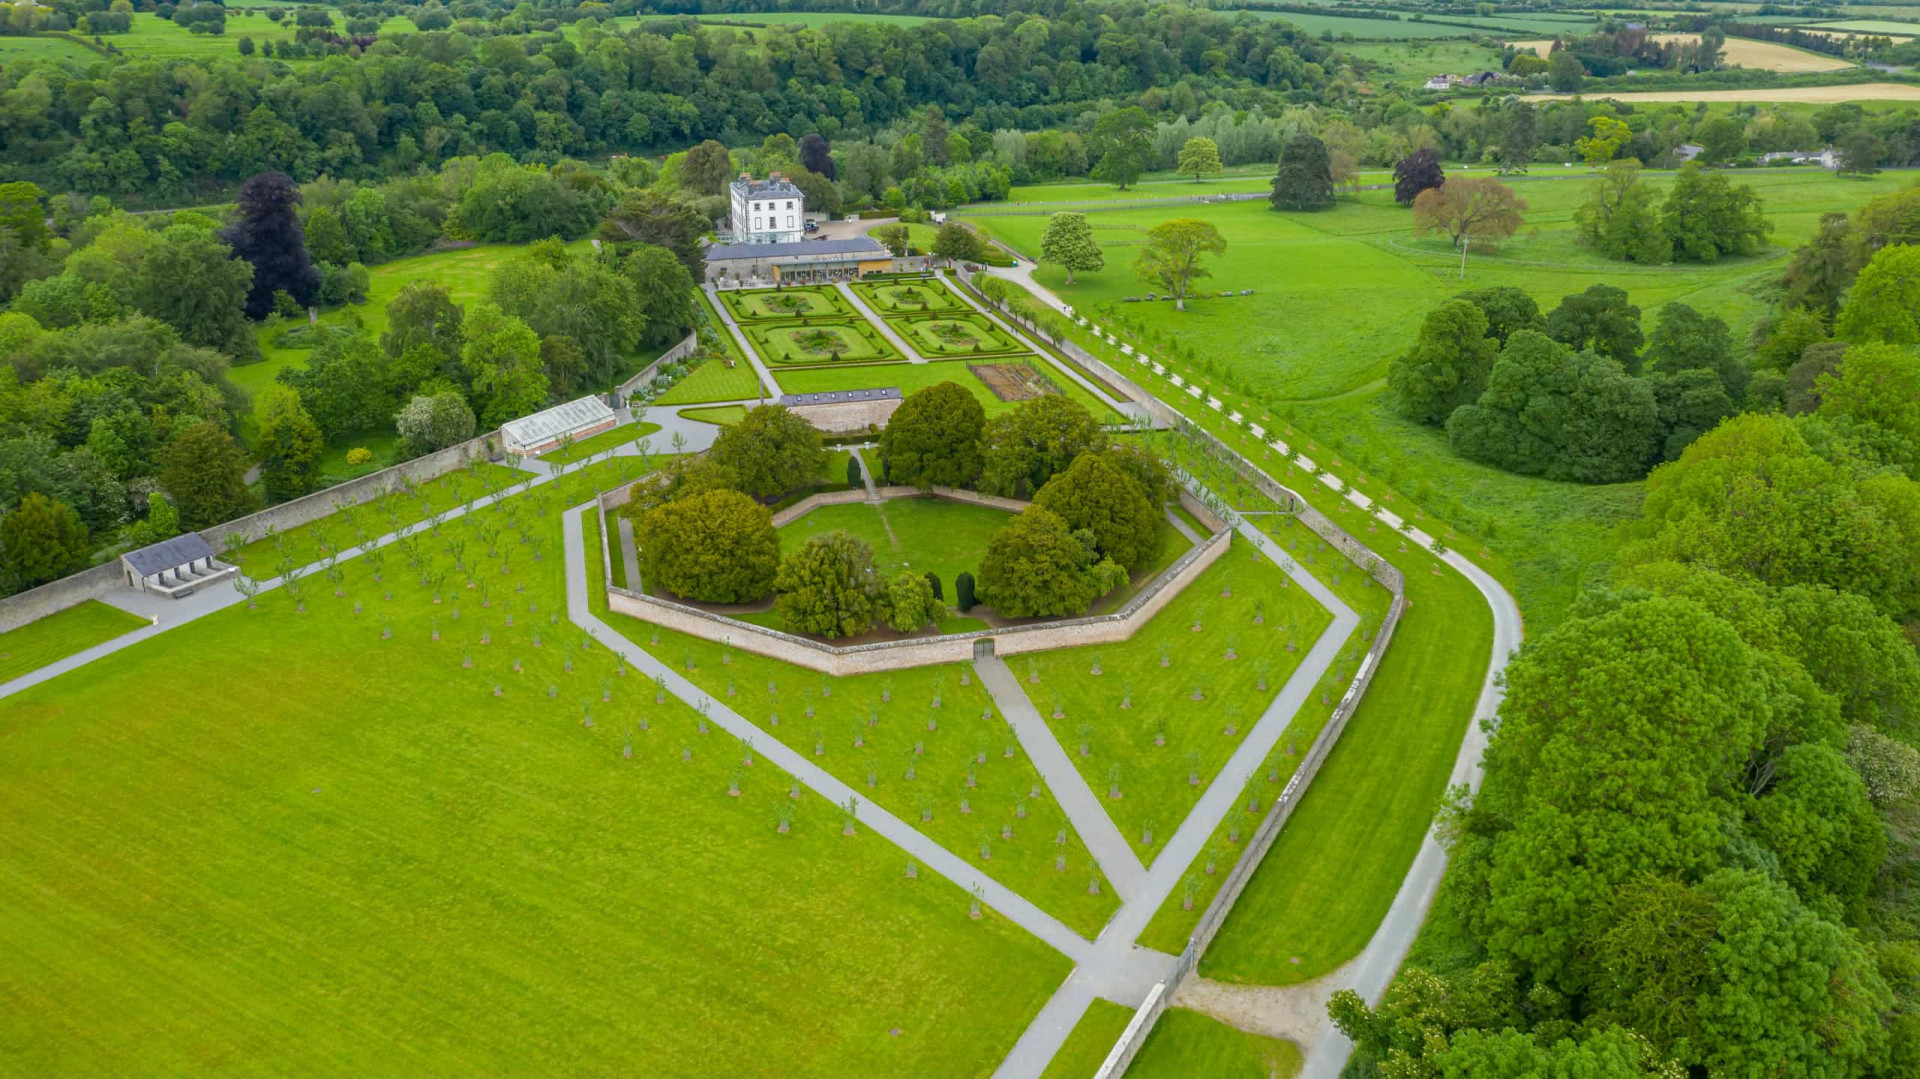 <p>The Battle of the Boyne was fought on July 1, 1690, and pitted the forces of King James II against those of William III. The well-maintained Boyne battlefield is located near the River Boyne, close to the town of Drogheda in Ireland.</p><p><a href="https://www.msn.com/en-za/community/channel/vid-7xx8mnucu55yw63we9va2gwr7uihbxwc68fxqp25x6tg4ftibpra?cvid=94631541bc0f4f89bfd59158d696ad7e">Follow us and access great exclusive content every day</a></p>